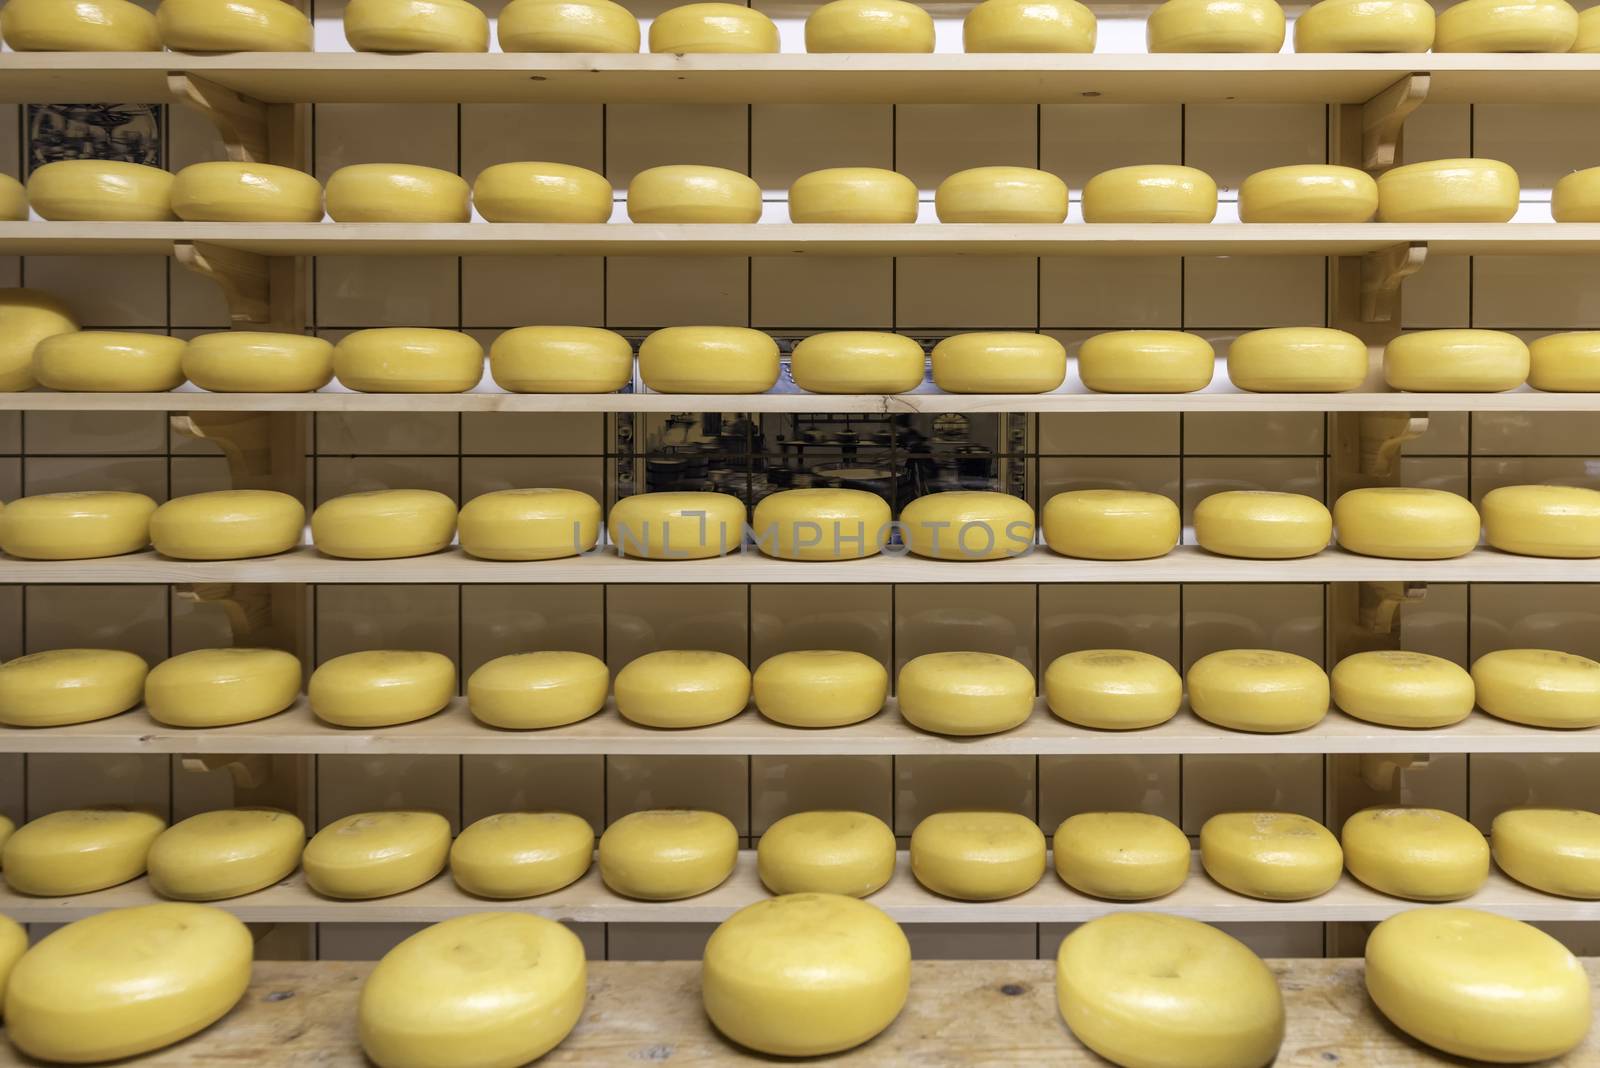 Block of Dutch cheese displayed on the tray in the cheese shop at Zaanse Schans, Netherlands by ankorlight